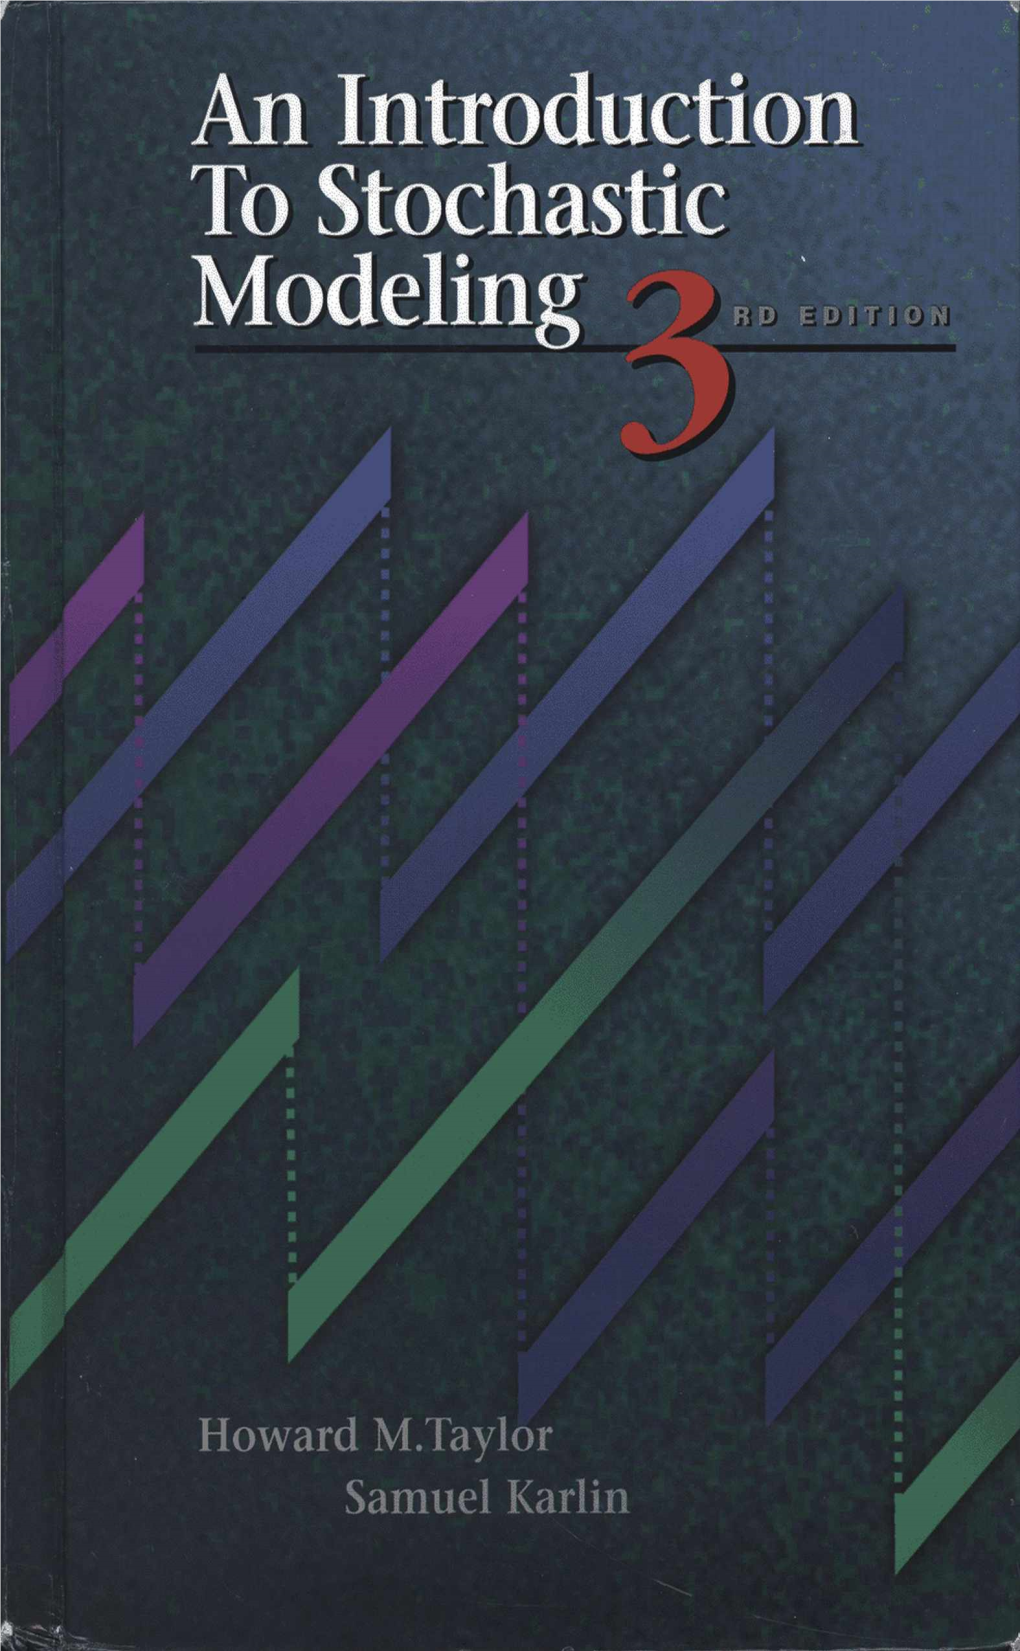 An Introduction to Stochastic Modeling, Third Edition